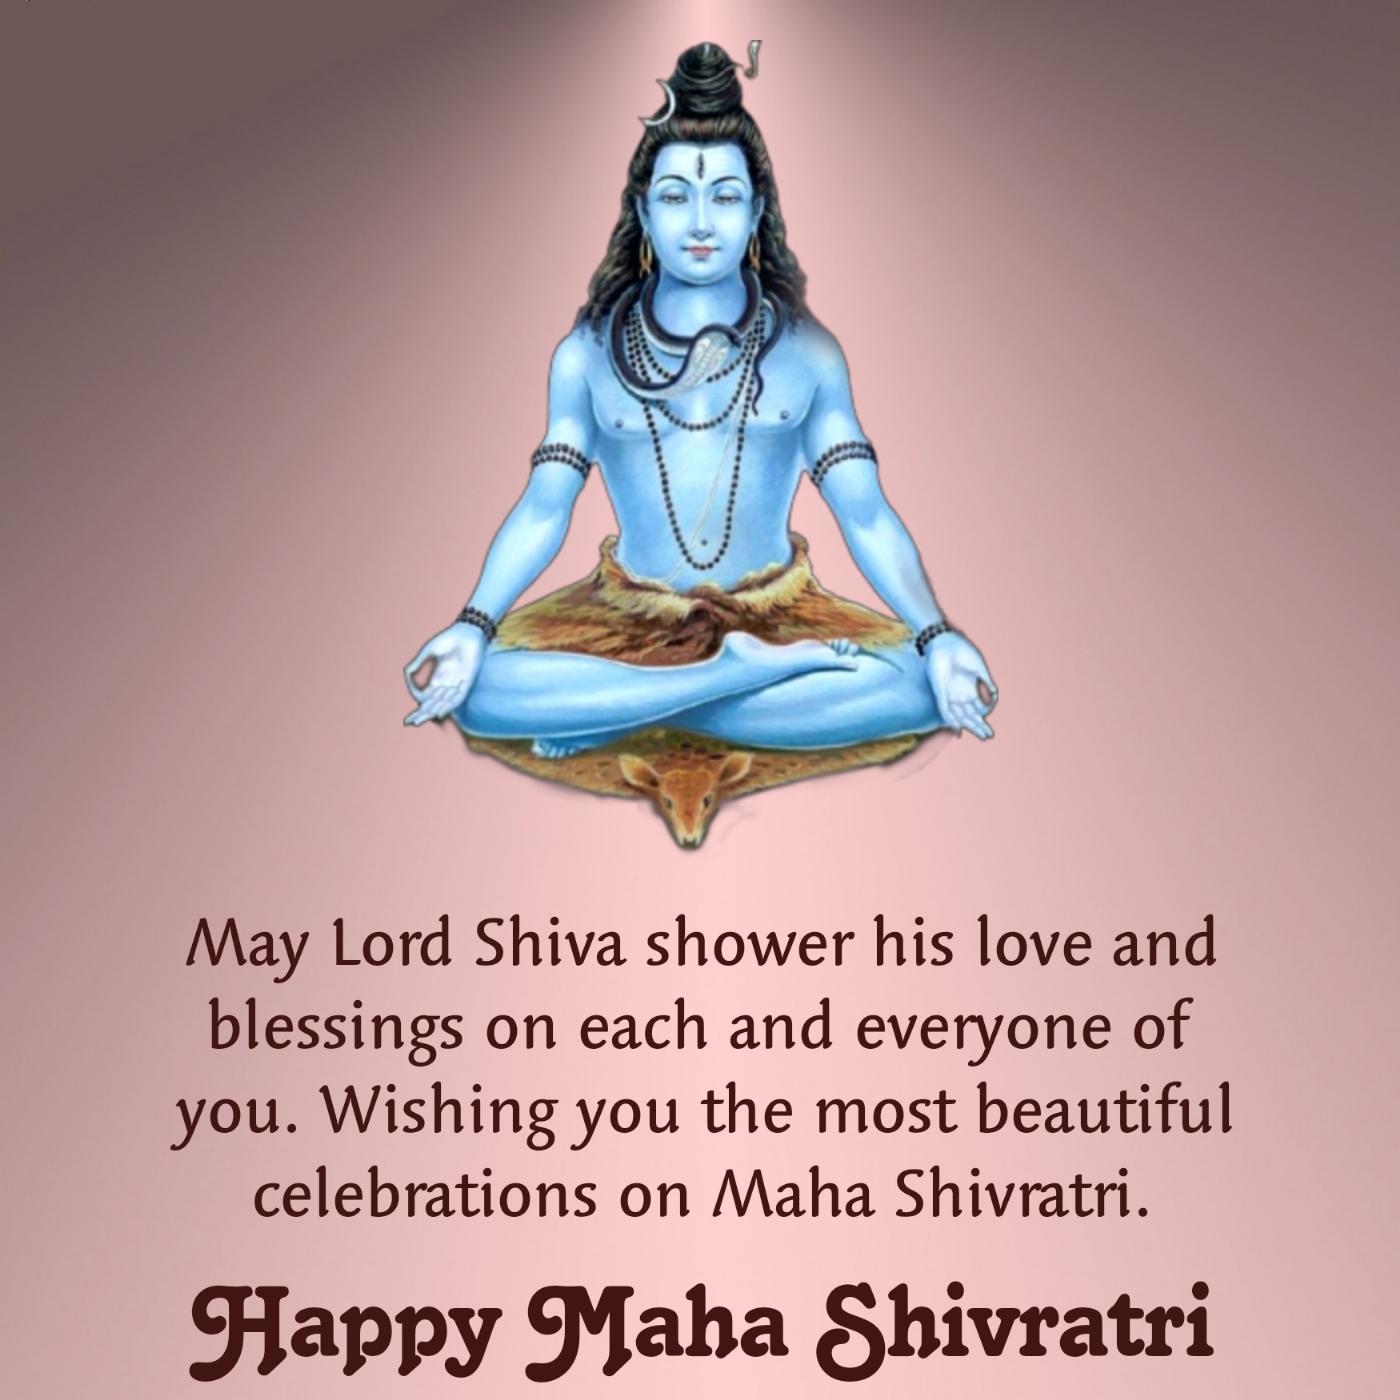 May Lord Shiva shower his love and blessings on each and everyone of you